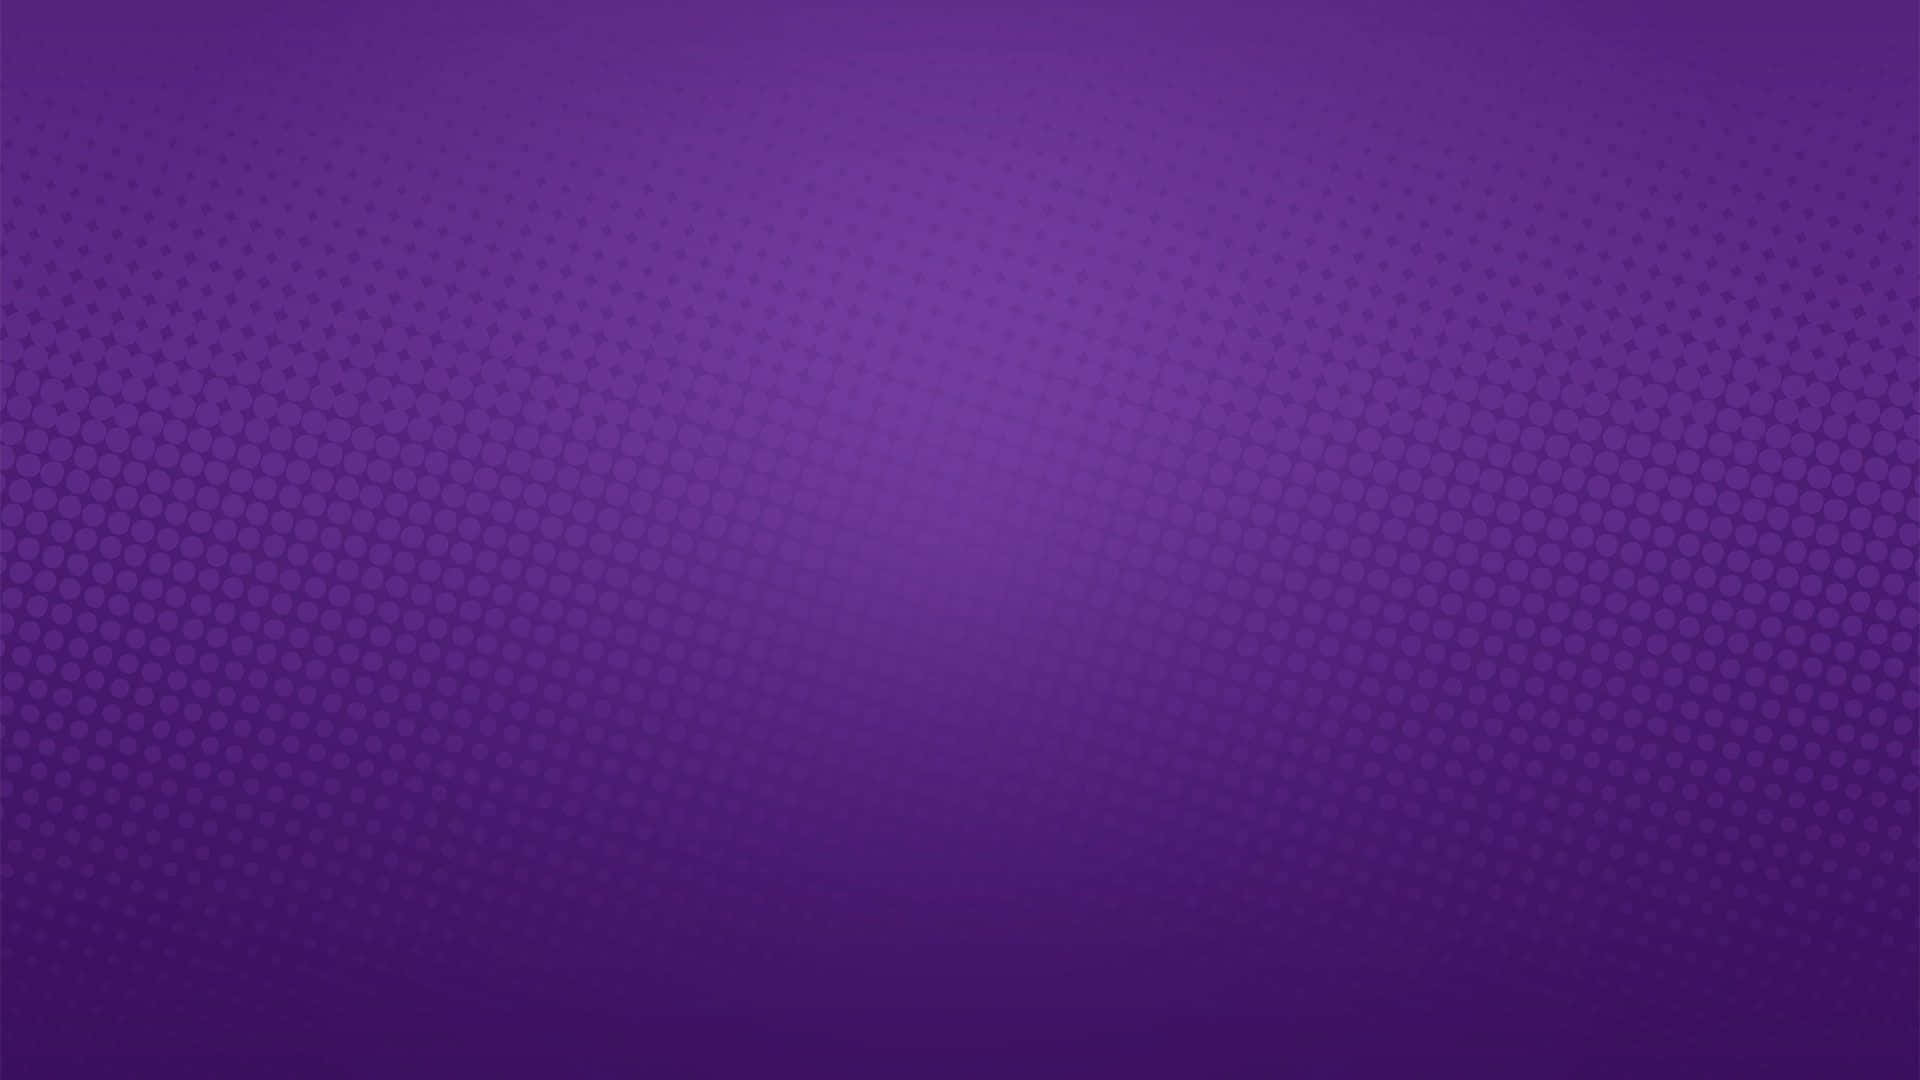 Power your work day with a sleek purple laptop Wallpaper